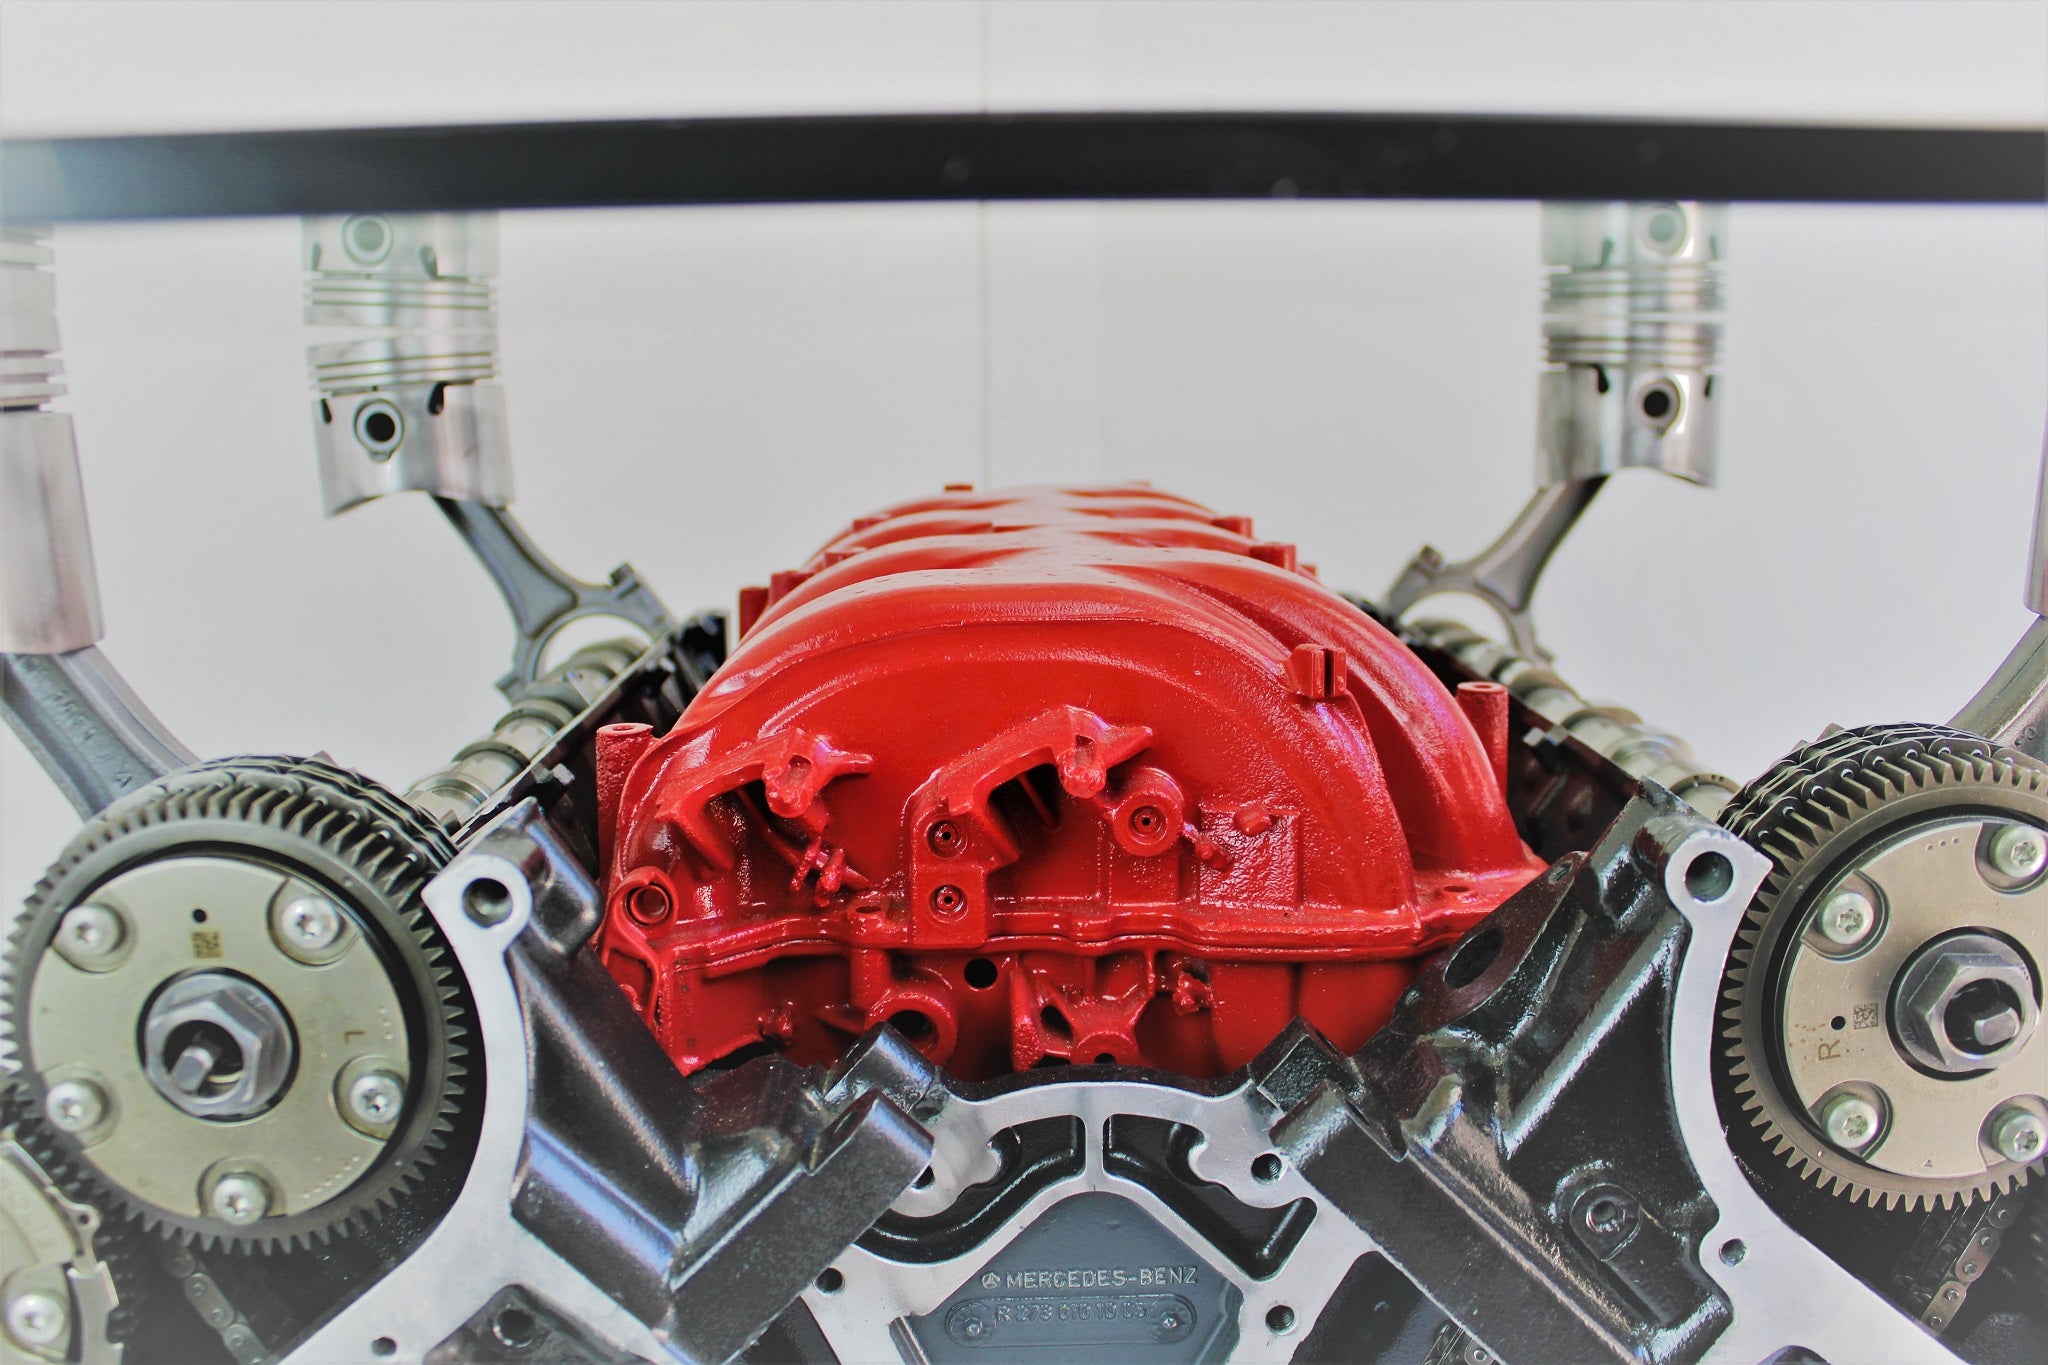 Close-up view of an intricate engine block coffee table finished in red, black and silver, the Mercedes Benz logo displayed in the center.